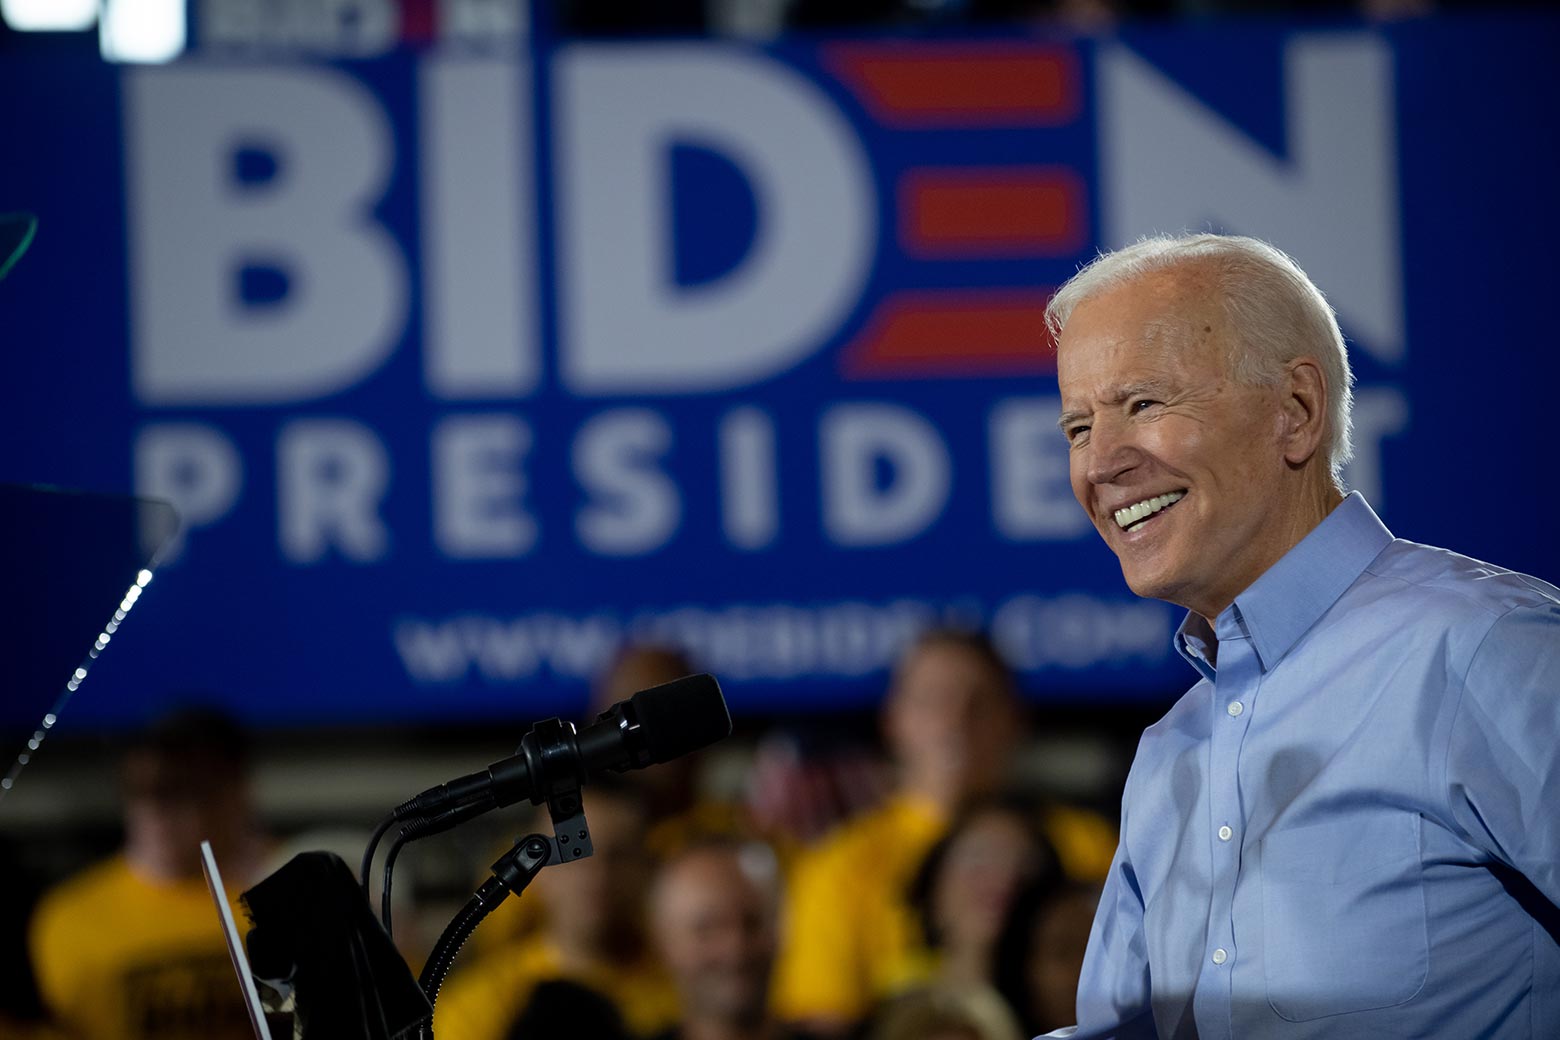 Joe Biden speaks at a campaign rally at Teamsters Local 249 Union Hall on Monday in Pittsburgh.